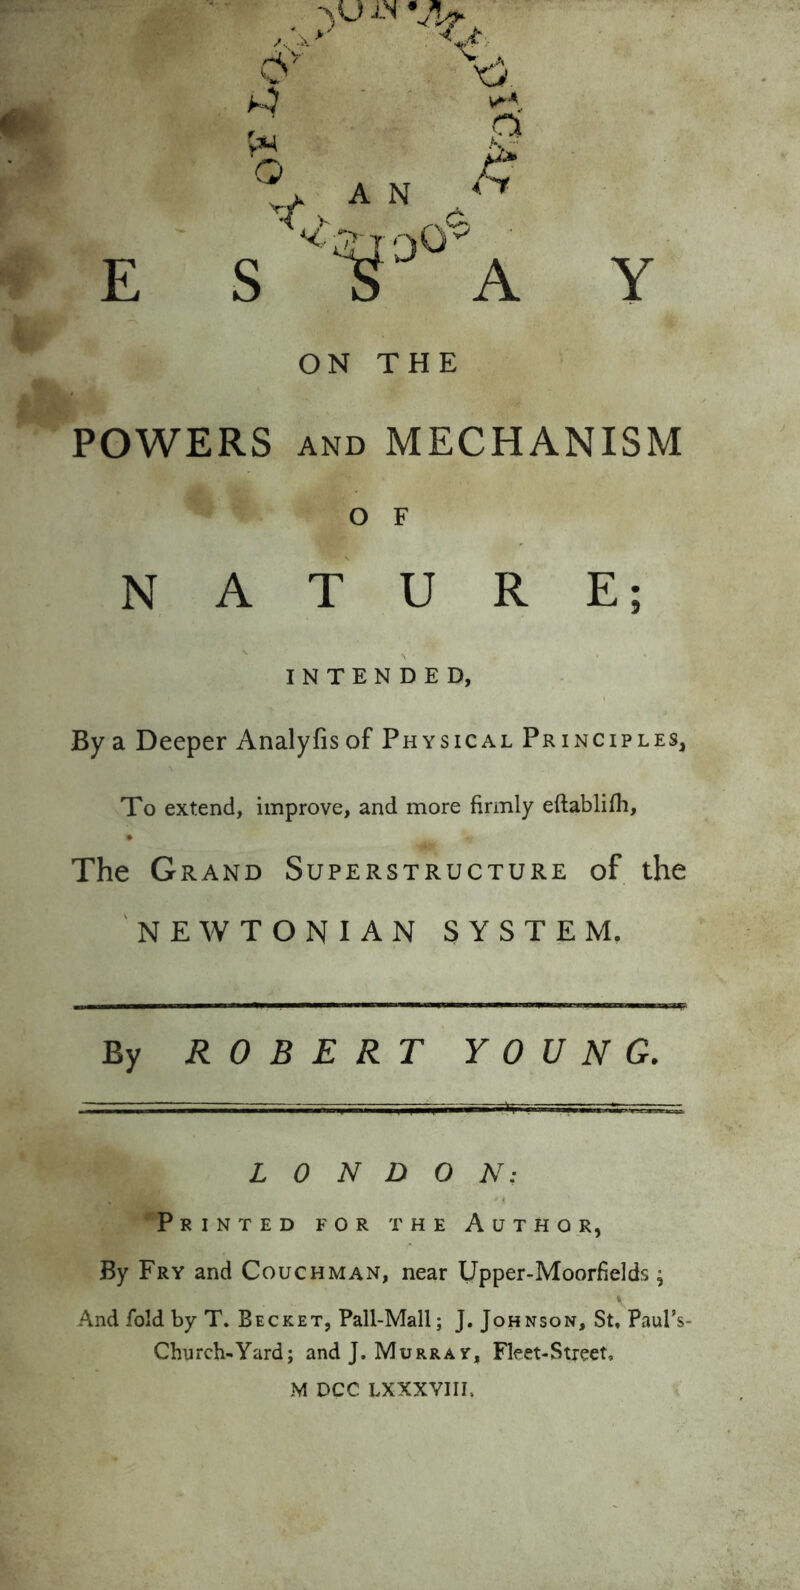 >•, Q a E S ON THE POWERS AND MECHANISM o F NATURE; INTENDED, By a Deeper Analyfis of Physical Principles, To extend, improve, and more firmly eftablifh. The Grand Superstructure of the NEWTONIAN SYSTEM, By ROBERT YOUNG. LONDON: Printed for the Author, By Fry and Couch man, near Upper-Moorfields; And fold by T. Becket, Pall-Mall; J. Johnson, St. Paul’s- Church-Yard; and J. Murray, Fleet-Street. M DCC LXXXVIII.